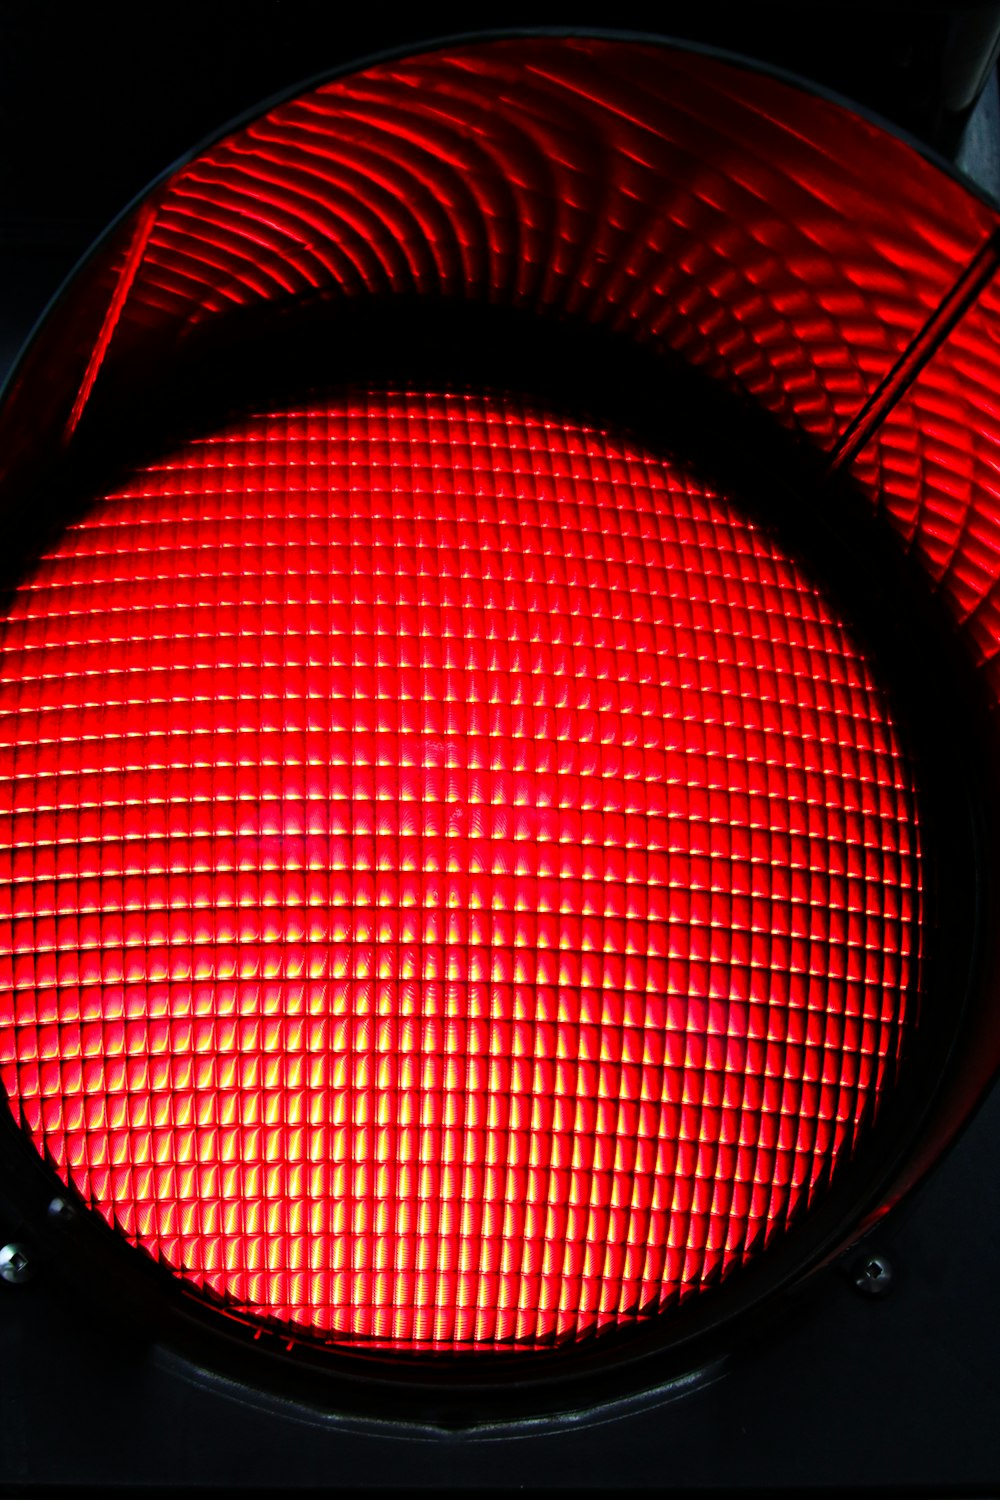 a close up of a traffic light with a red light